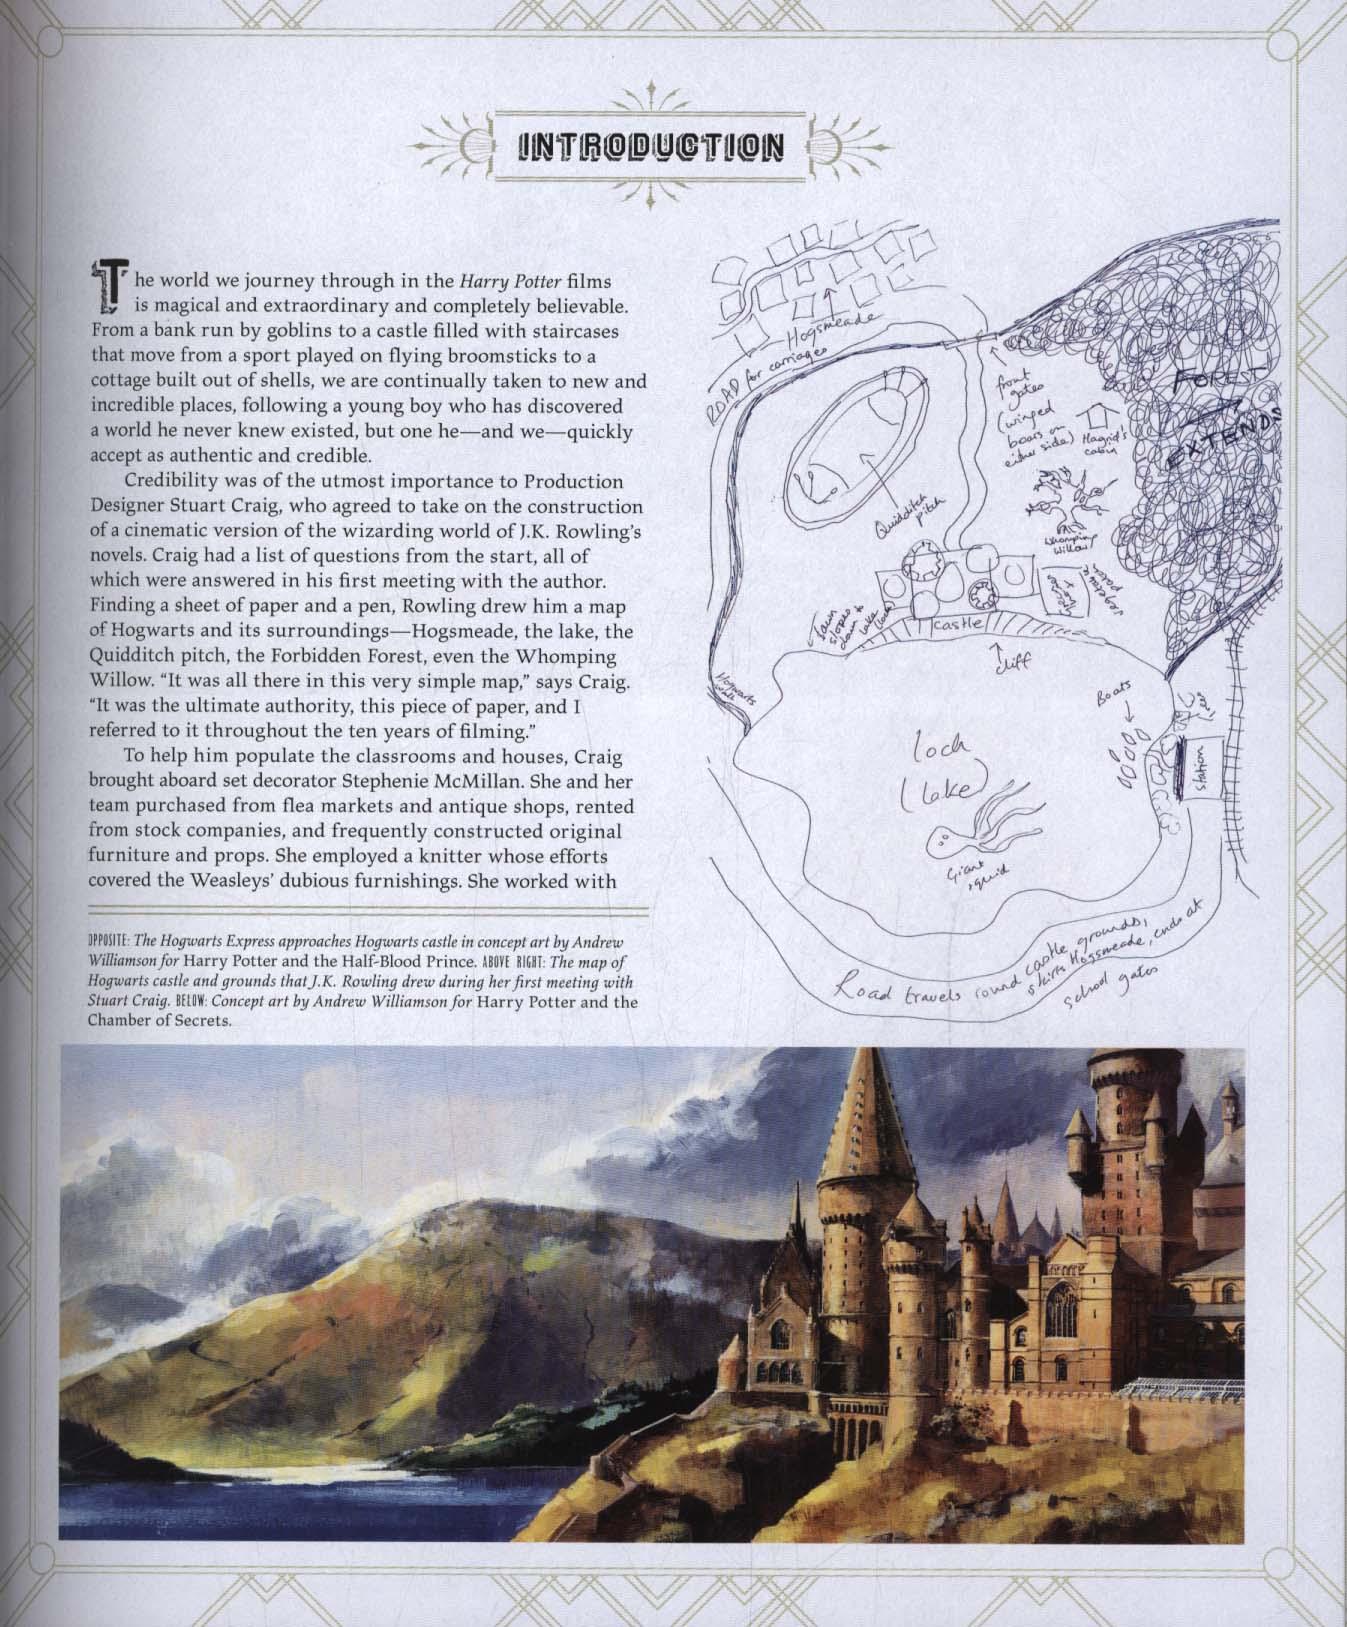 Harry Potter: Magical Places from the Films